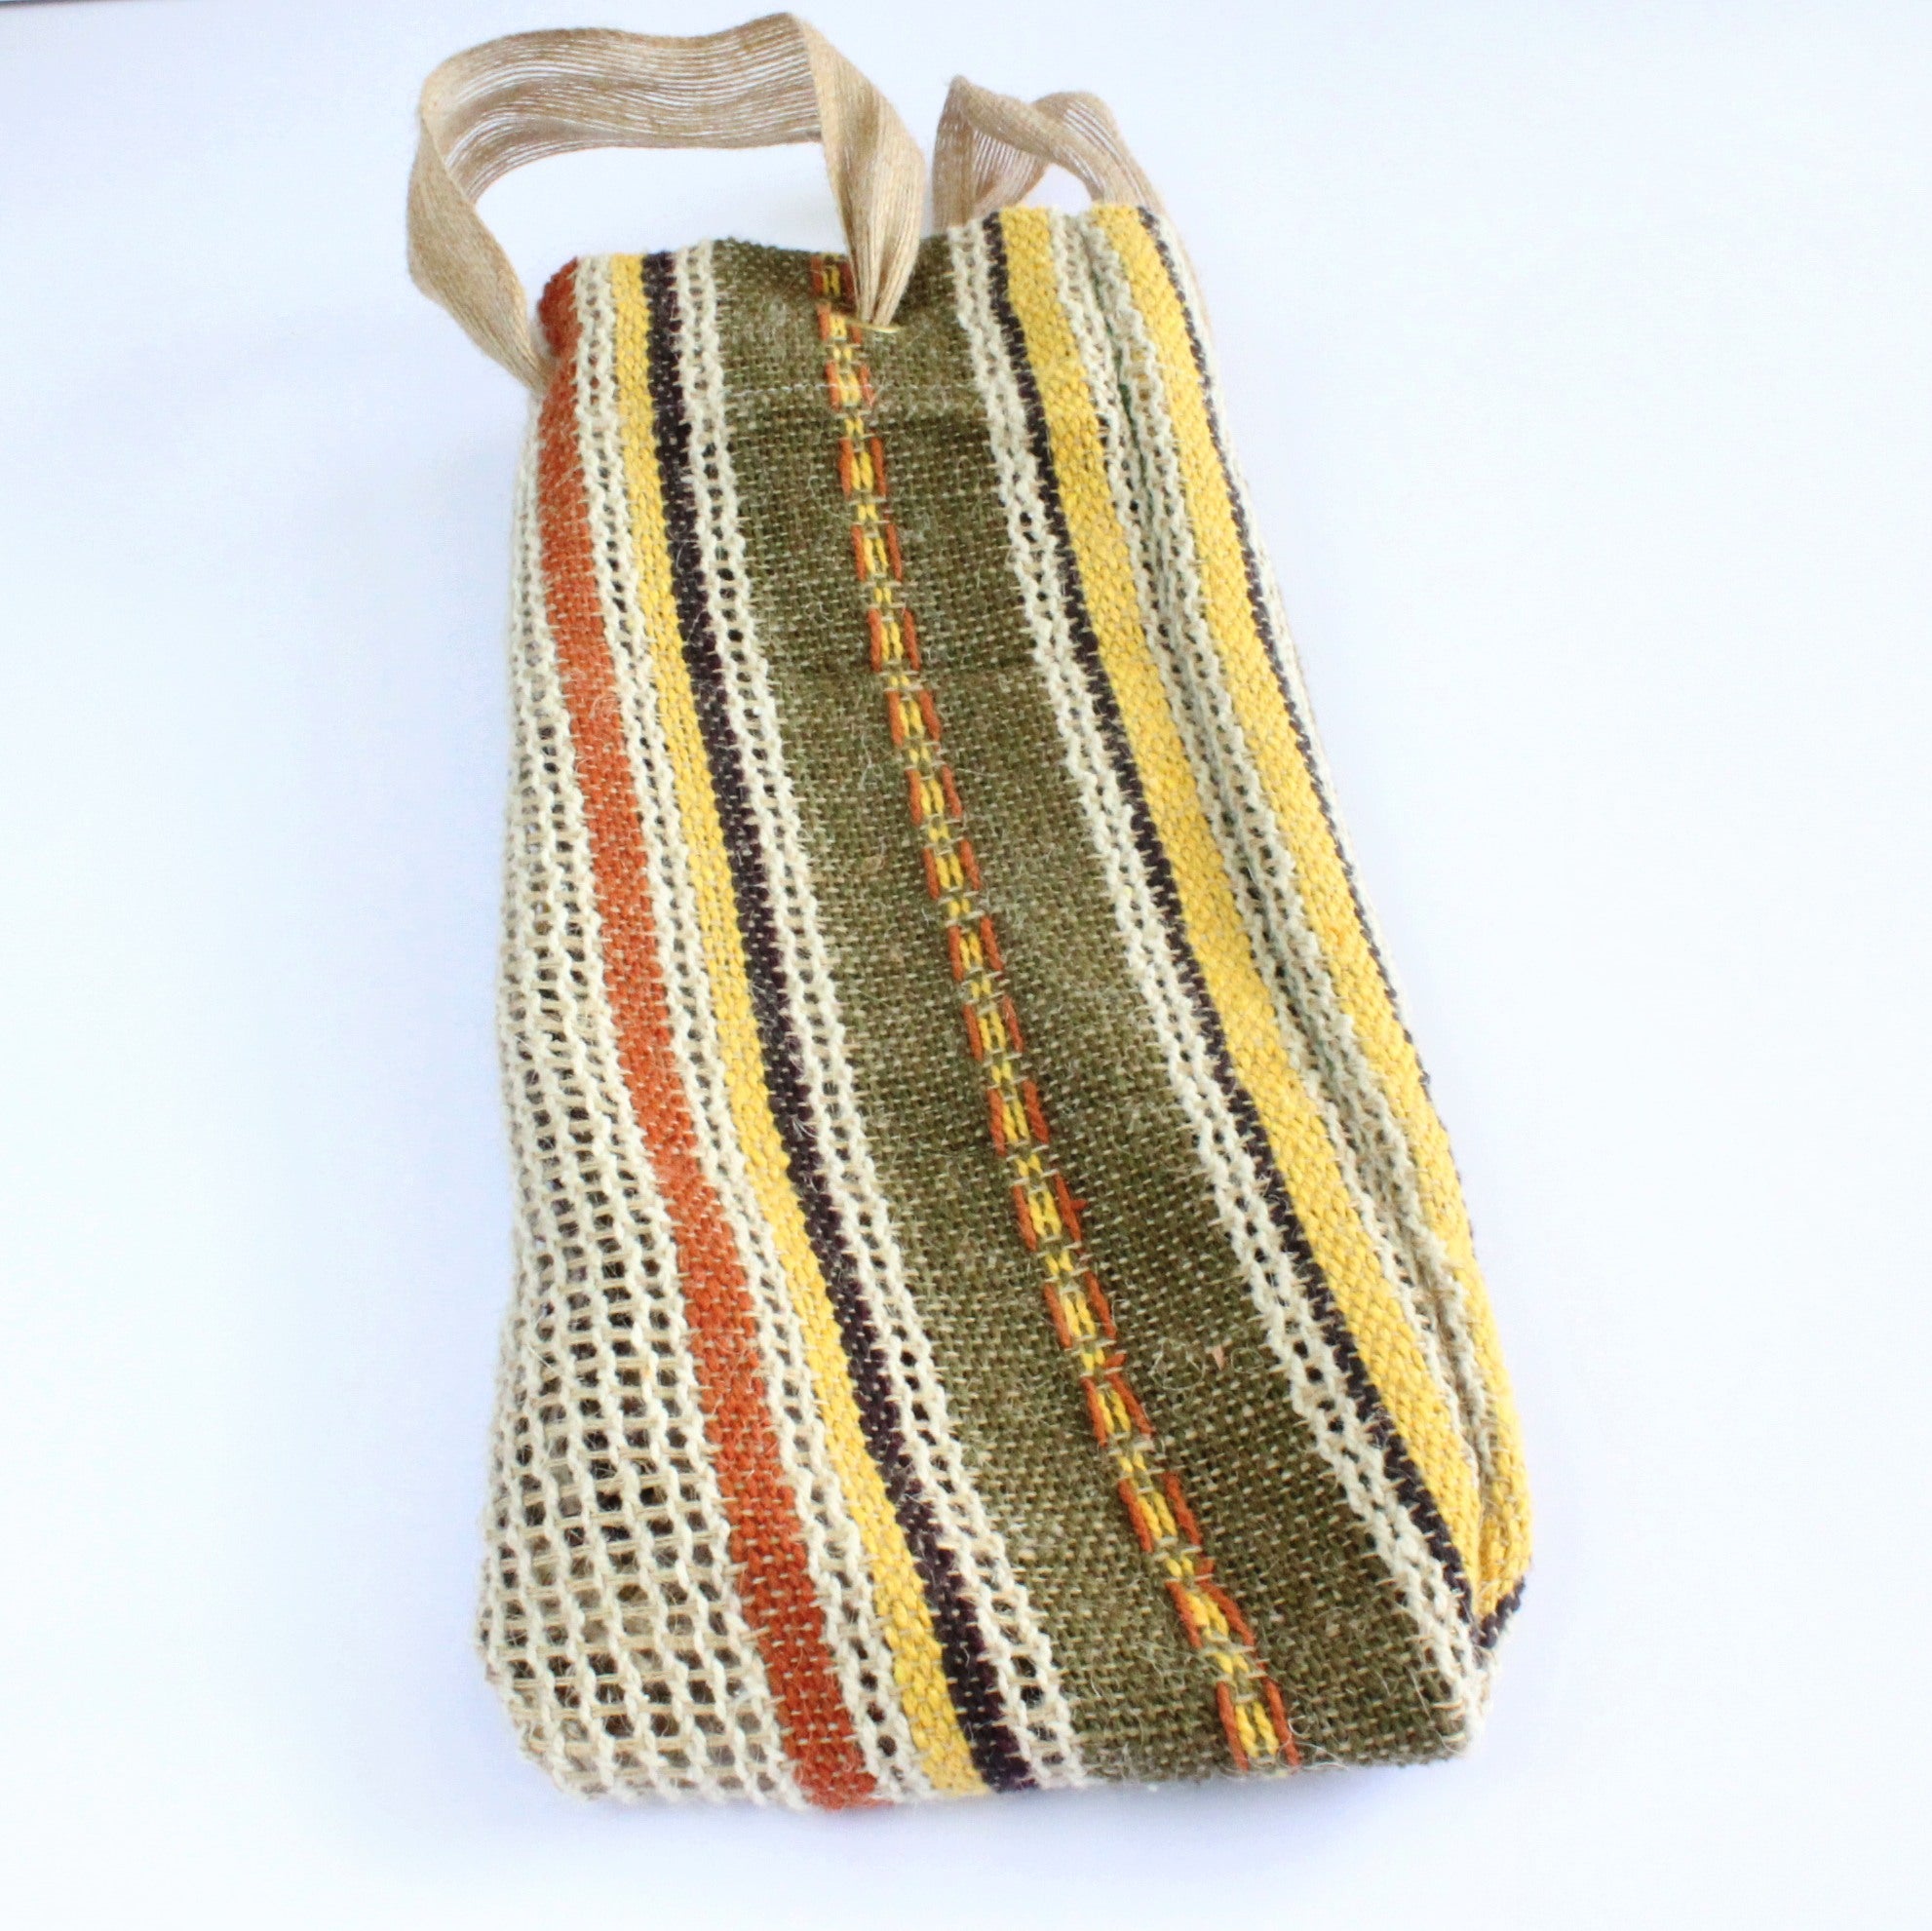 Wine bag, gift, upcycled, retro, wine carrier